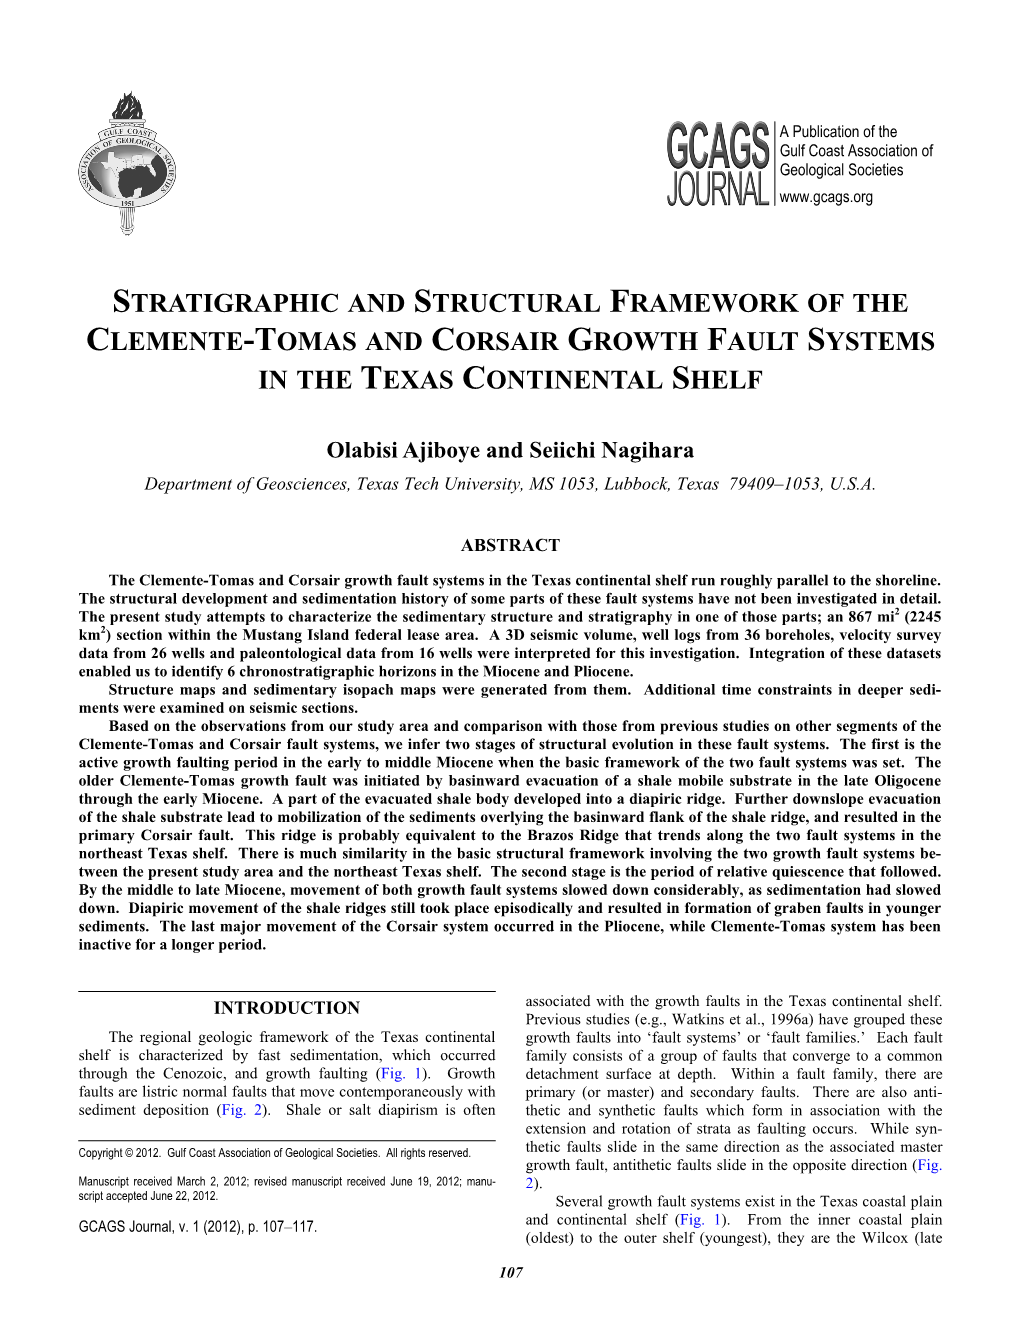 Stratigraphic and Structural Framework of the Clemente-Tomas and Corsair Growth Fault Systems in the Texas Continental Shelf